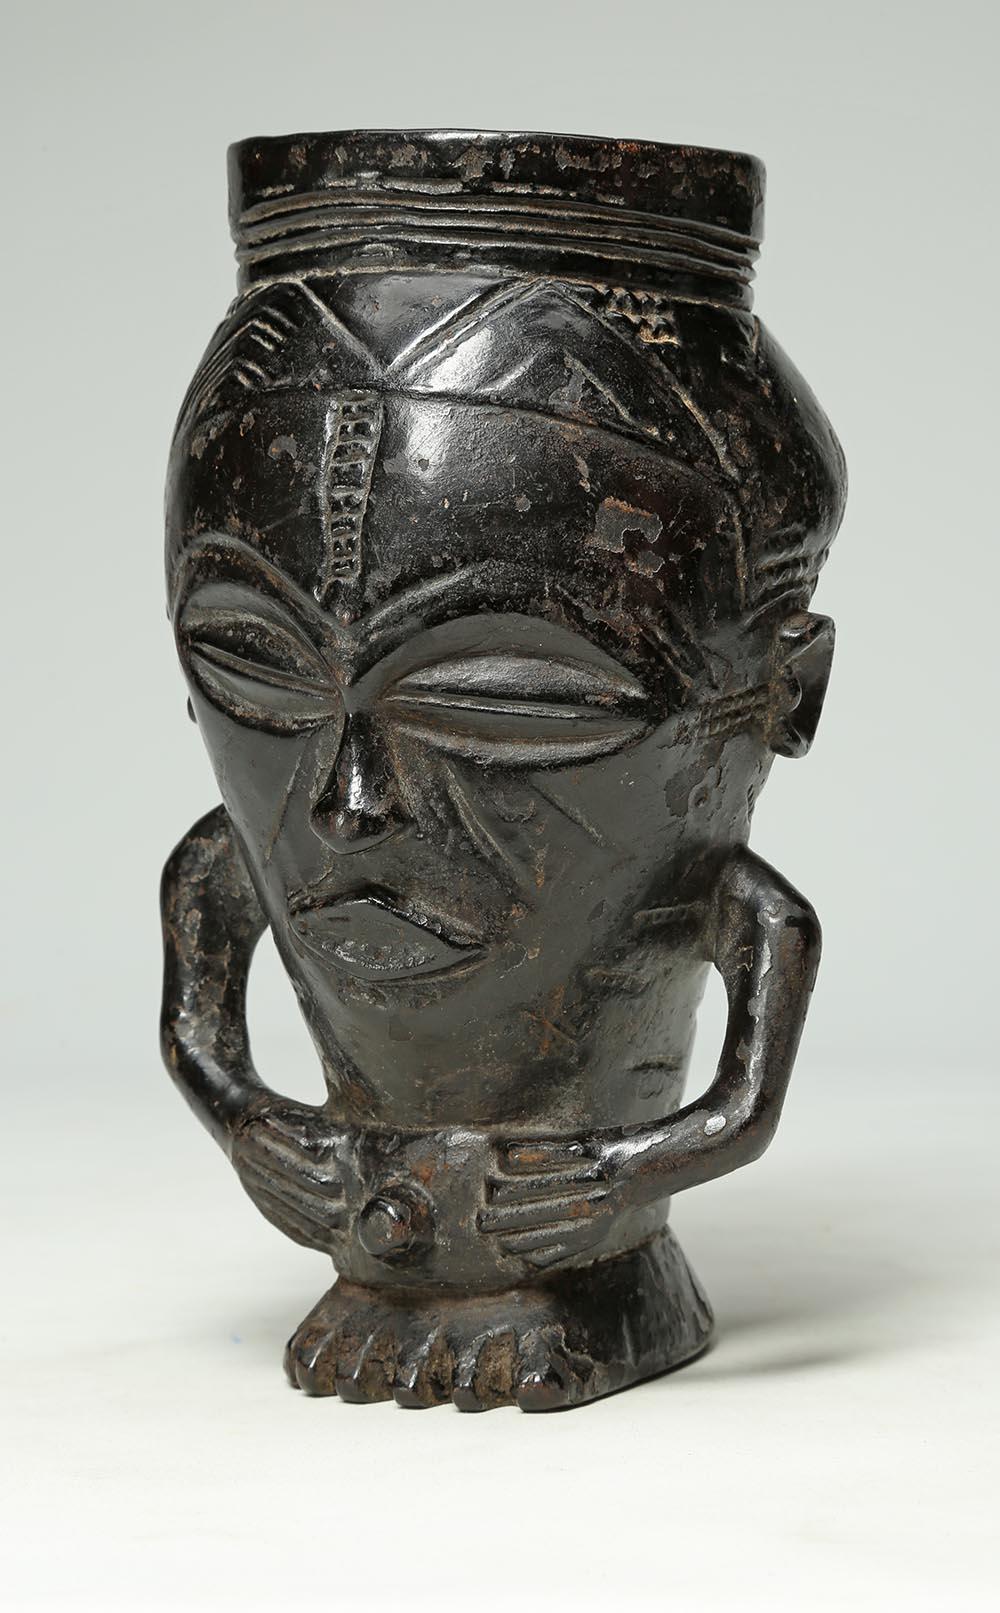 Early finely carved wood tribal Kuba figural cup, Congo with rich dark patina. In the form of a stylized figure with hands on stomach, ending on a foot. Deep patina from extensive use. Early 20th century. Cup 8 x 4 1/2 x 4 1/2 inches. Kuba palm wine